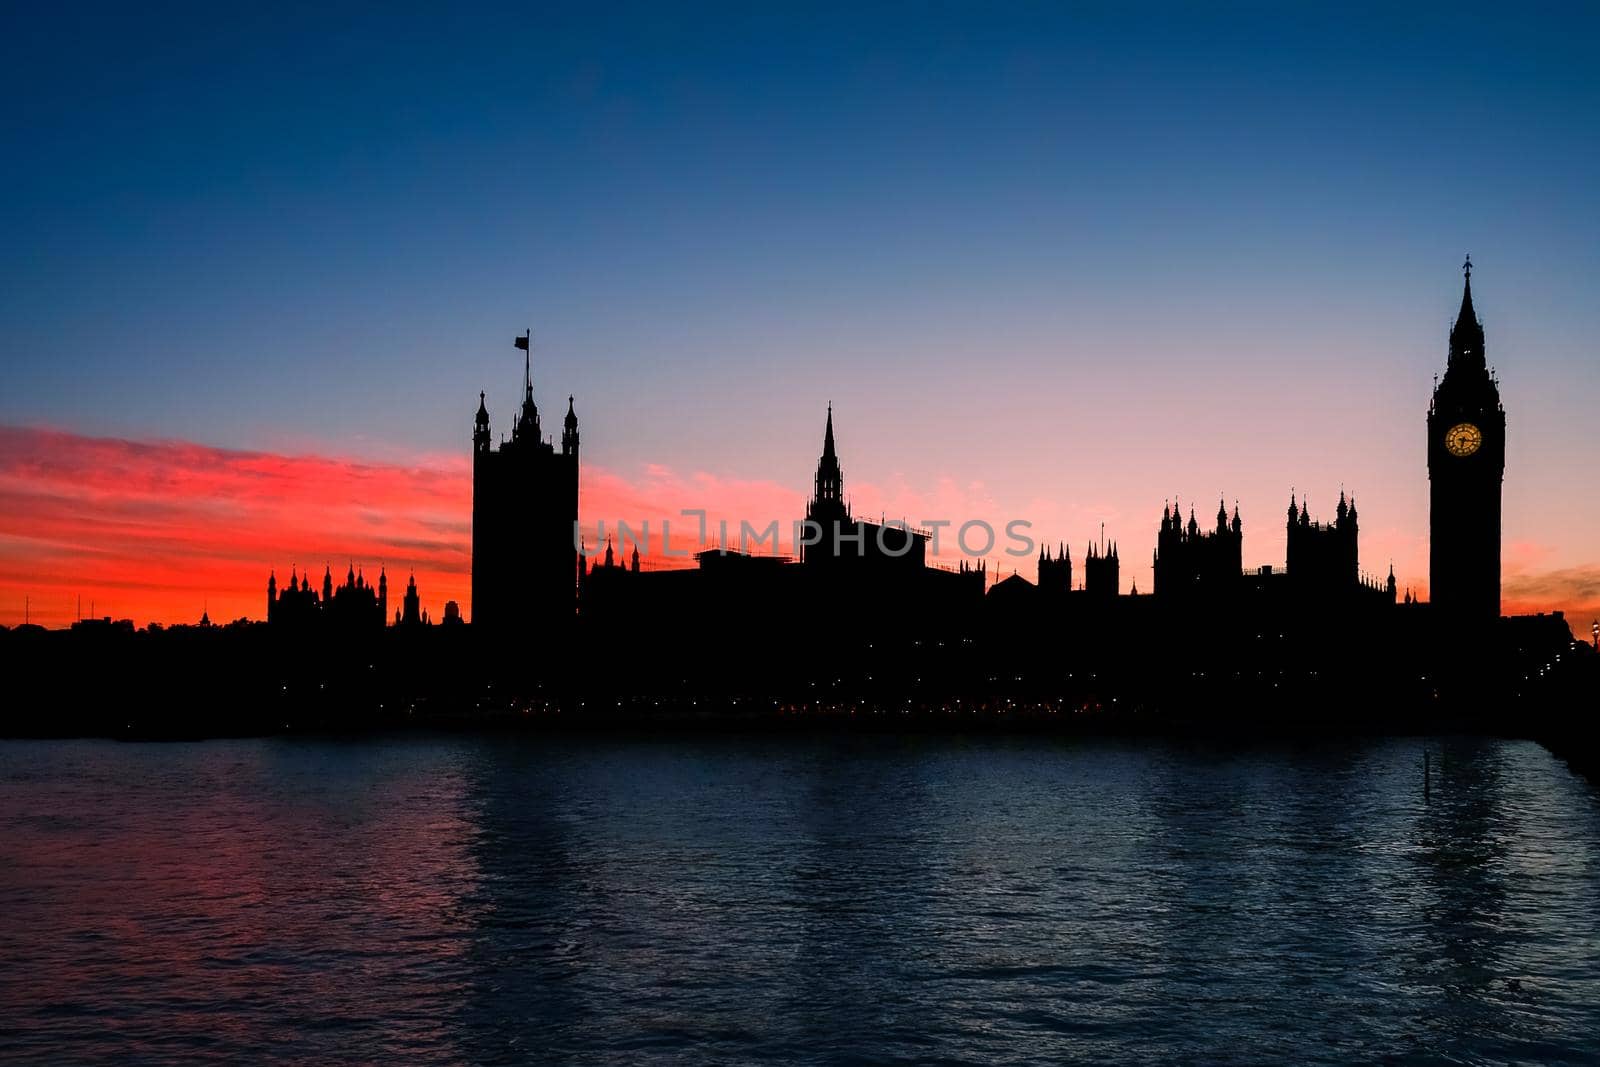 Silhouette of Big Ben and Parliament, London against an orange sunset by magicbones